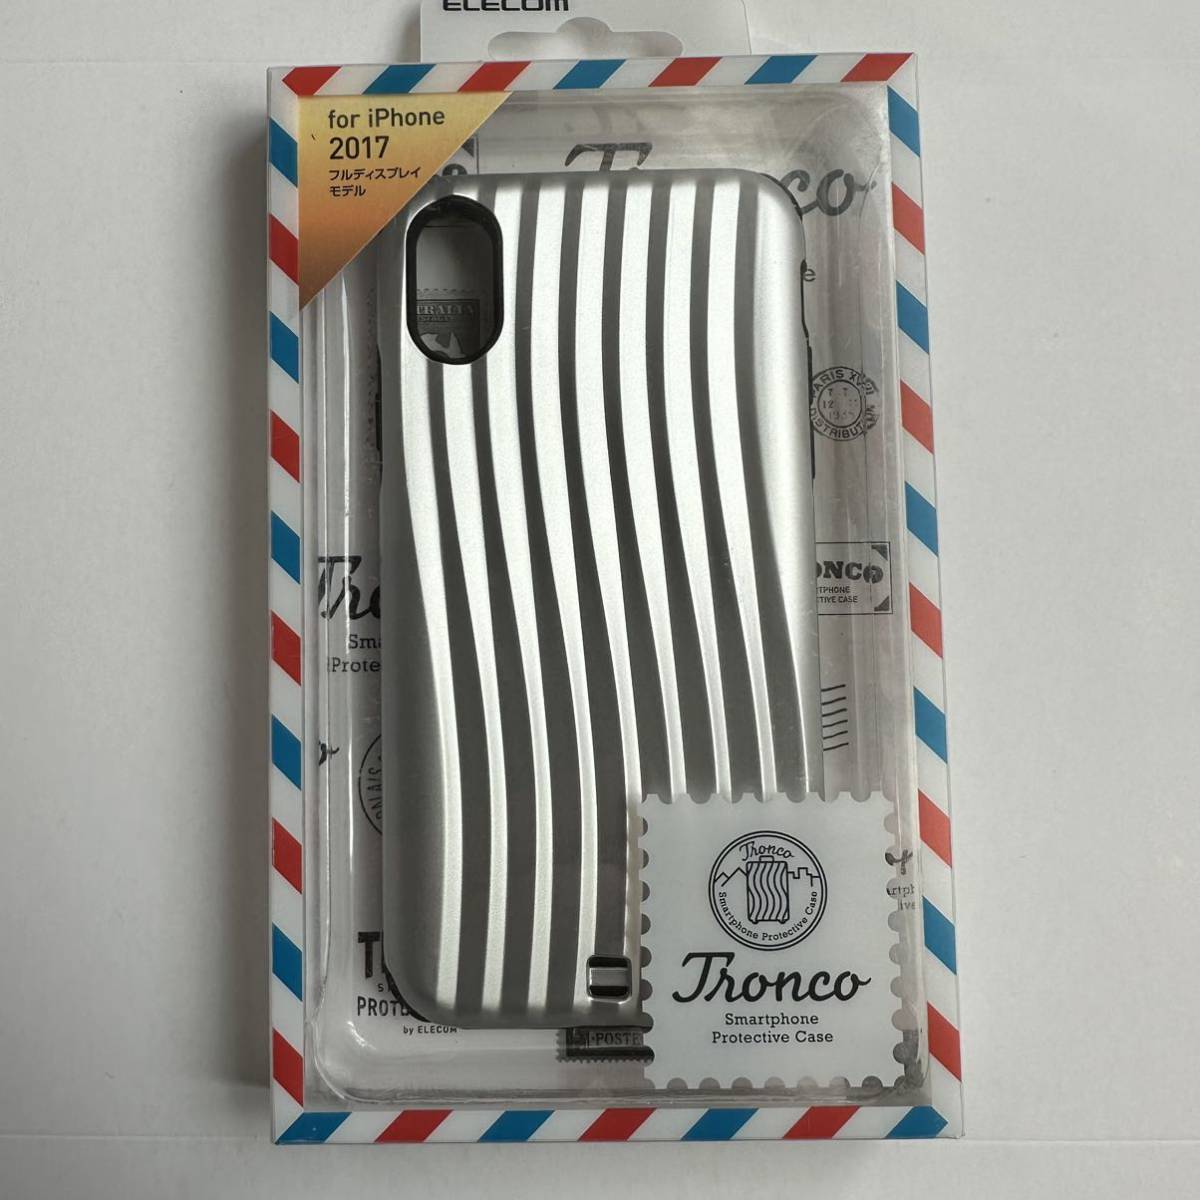 iPhone X/XS for hard case * four . air cushion * Carry case manner design * impact absorption *ELECOM* silver 